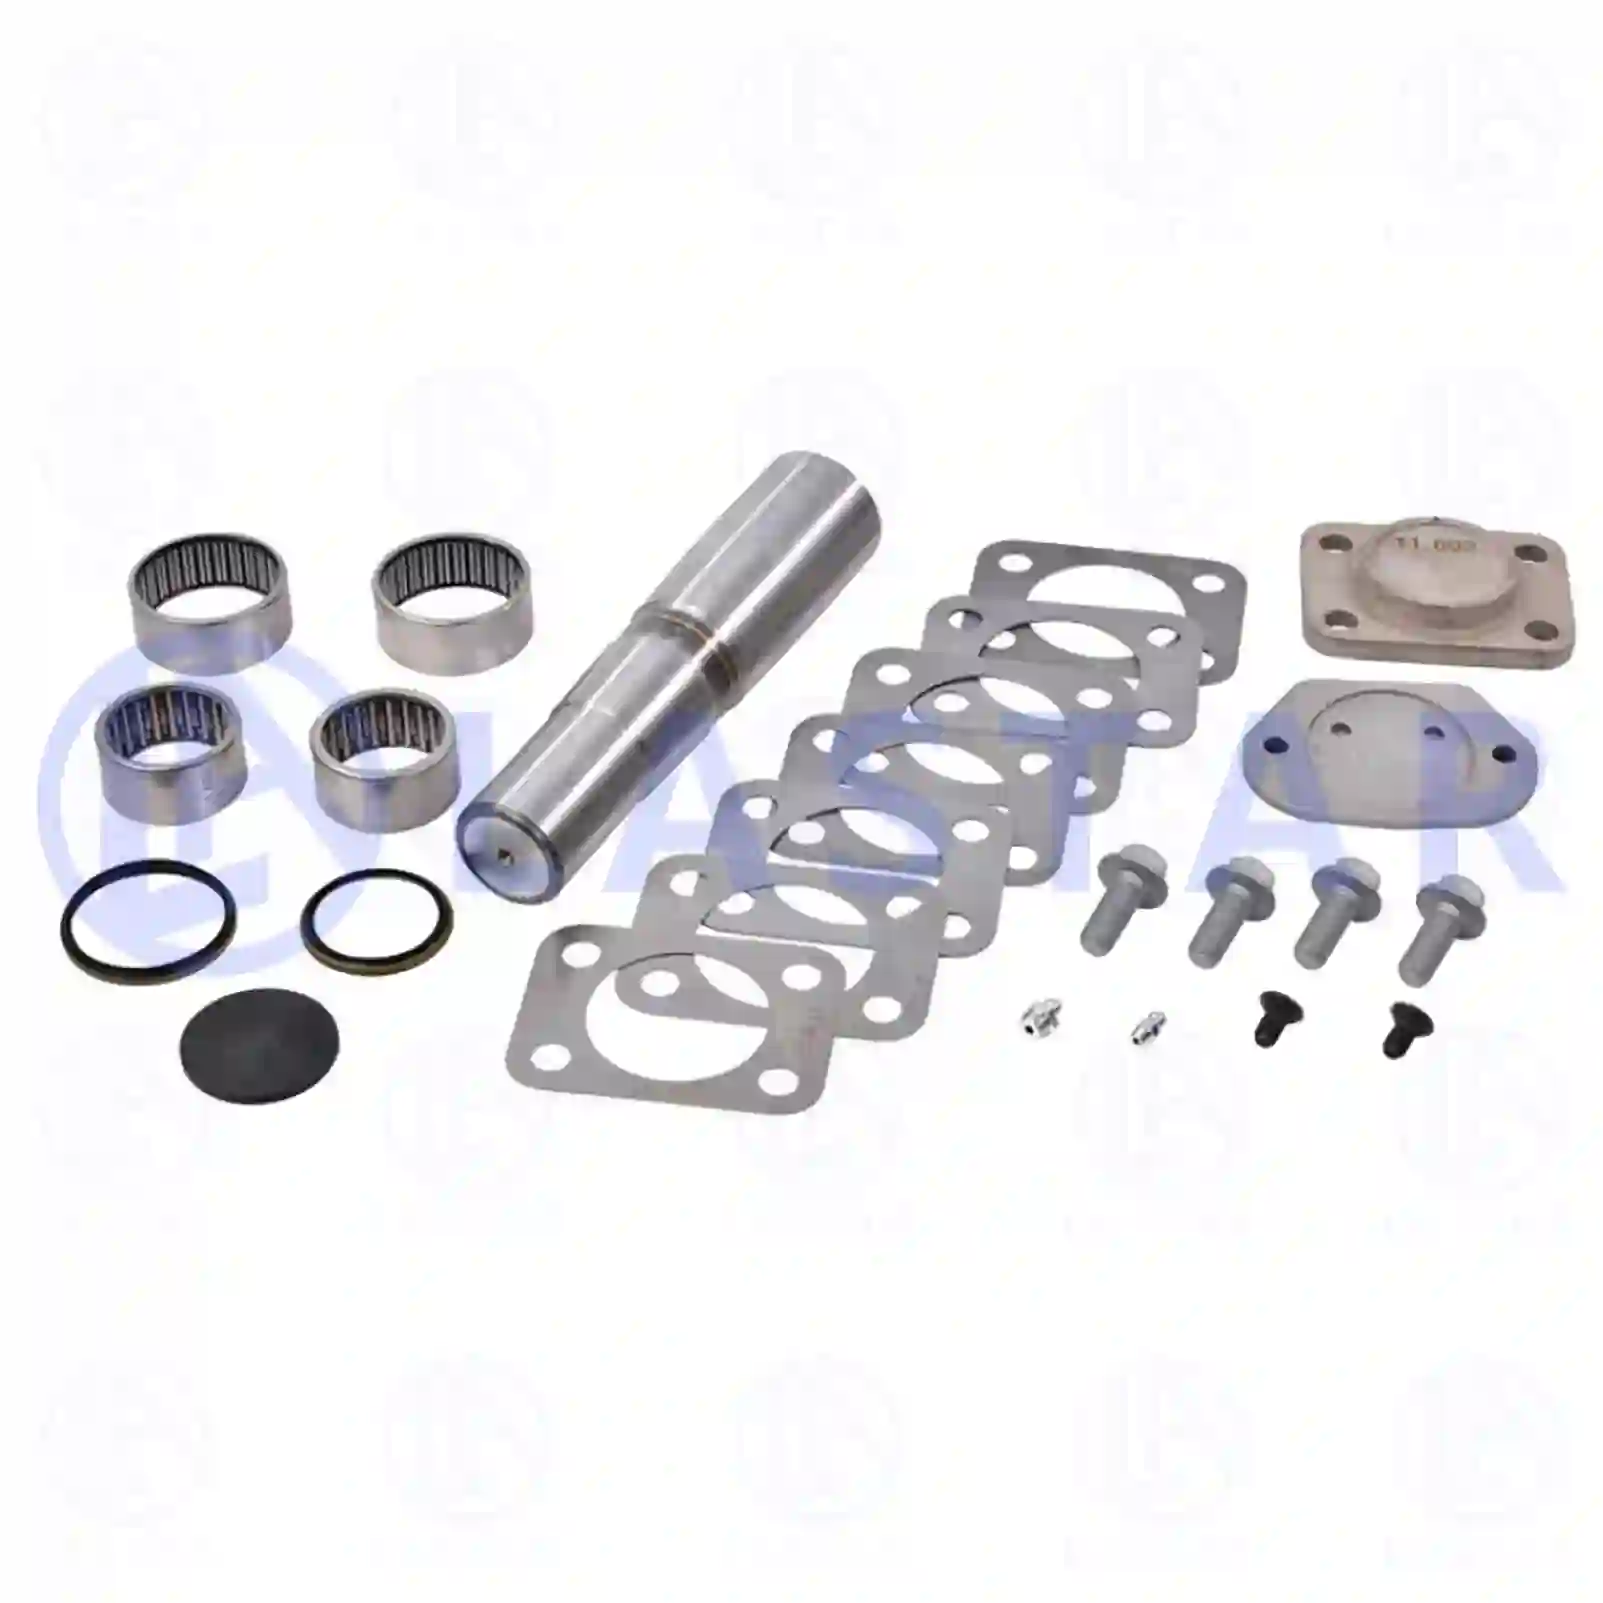 King pin kit, left, 77731367, 42471014, , ||  77731367 Lastar Spare Part | Truck Spare Parts, Auotomotive Spare Parts King pin kit, left, 77731367, 42471014, , ||  77731367 Lastar Spare Part | Truck Spare Parts, Auotomotive Spare Parts